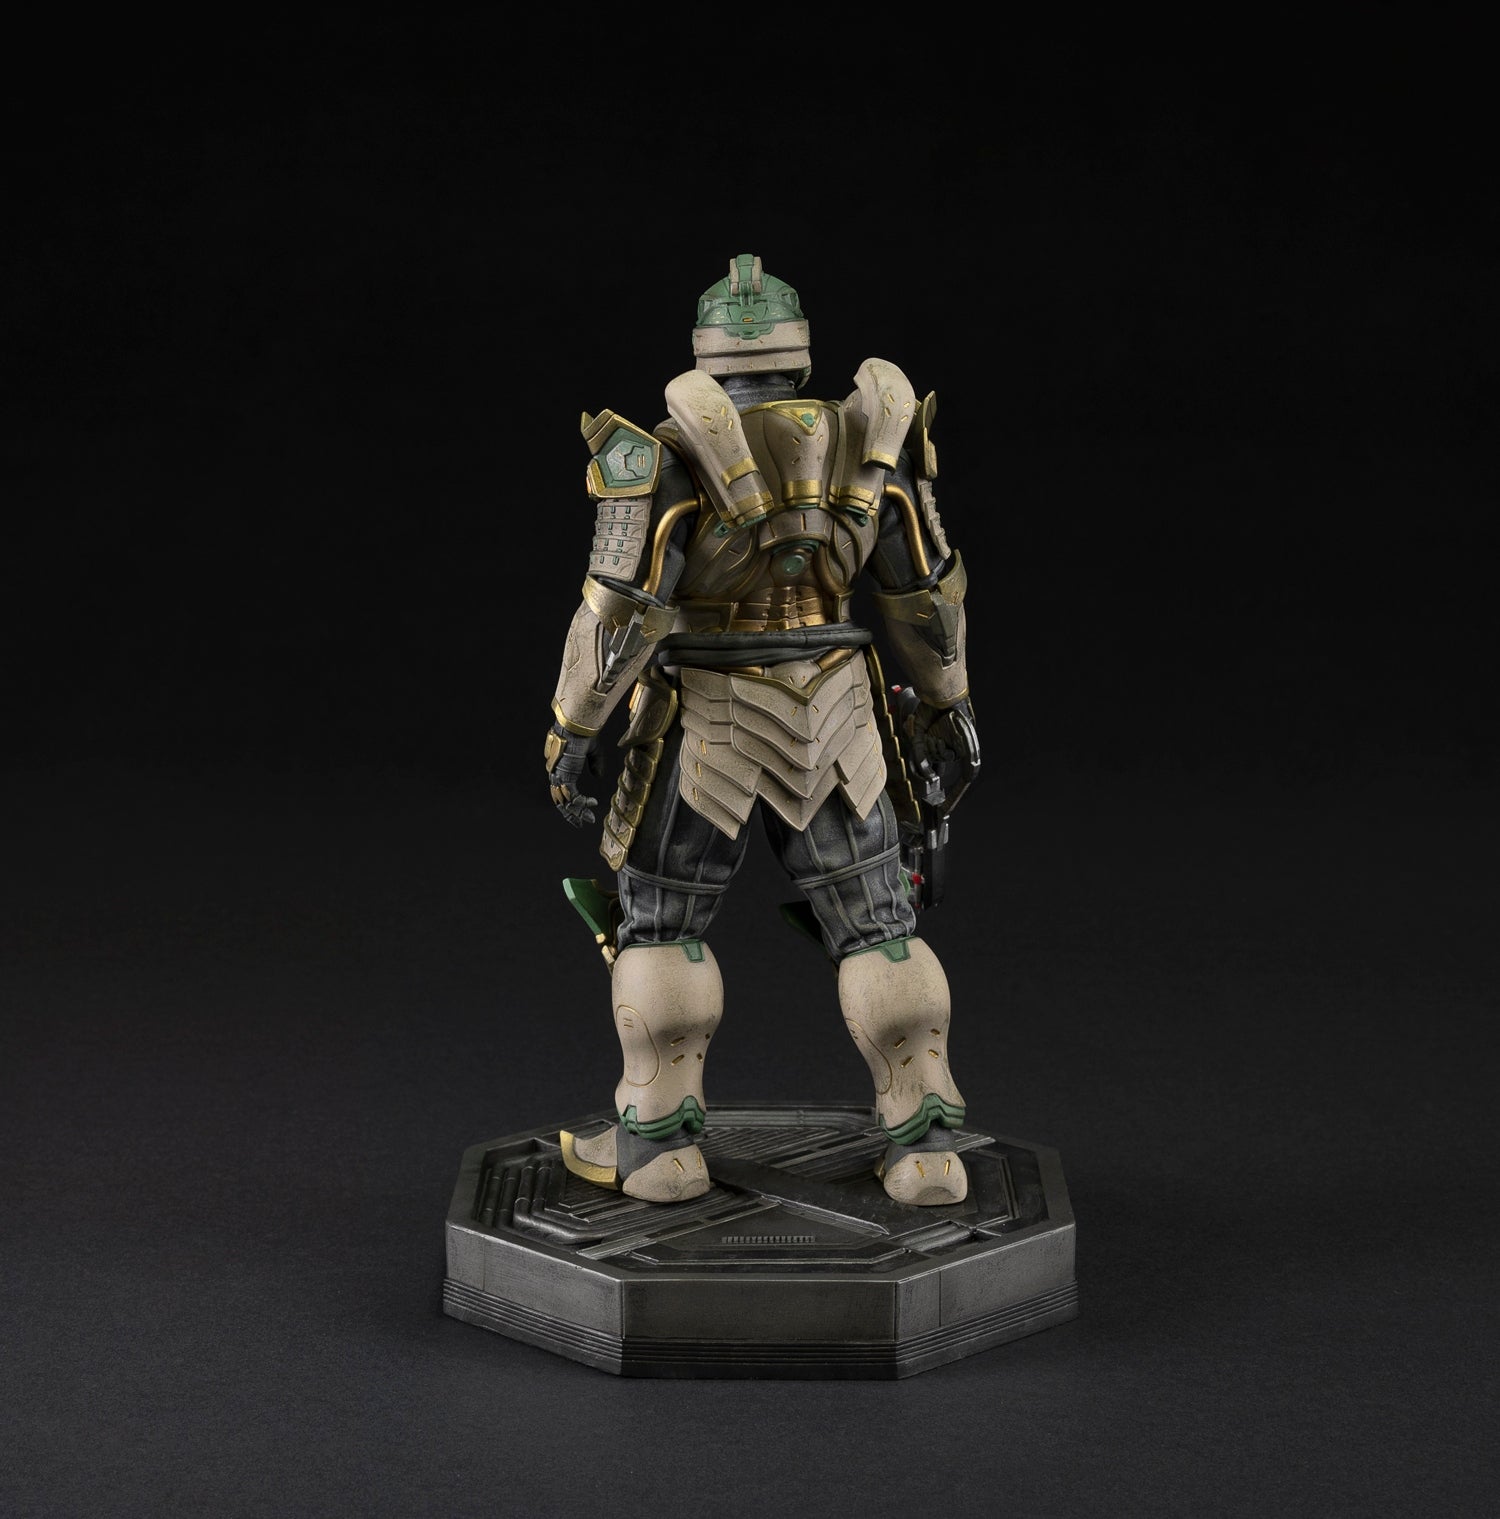 Action Figures – Tagged Halo– Xbox Gear Shop